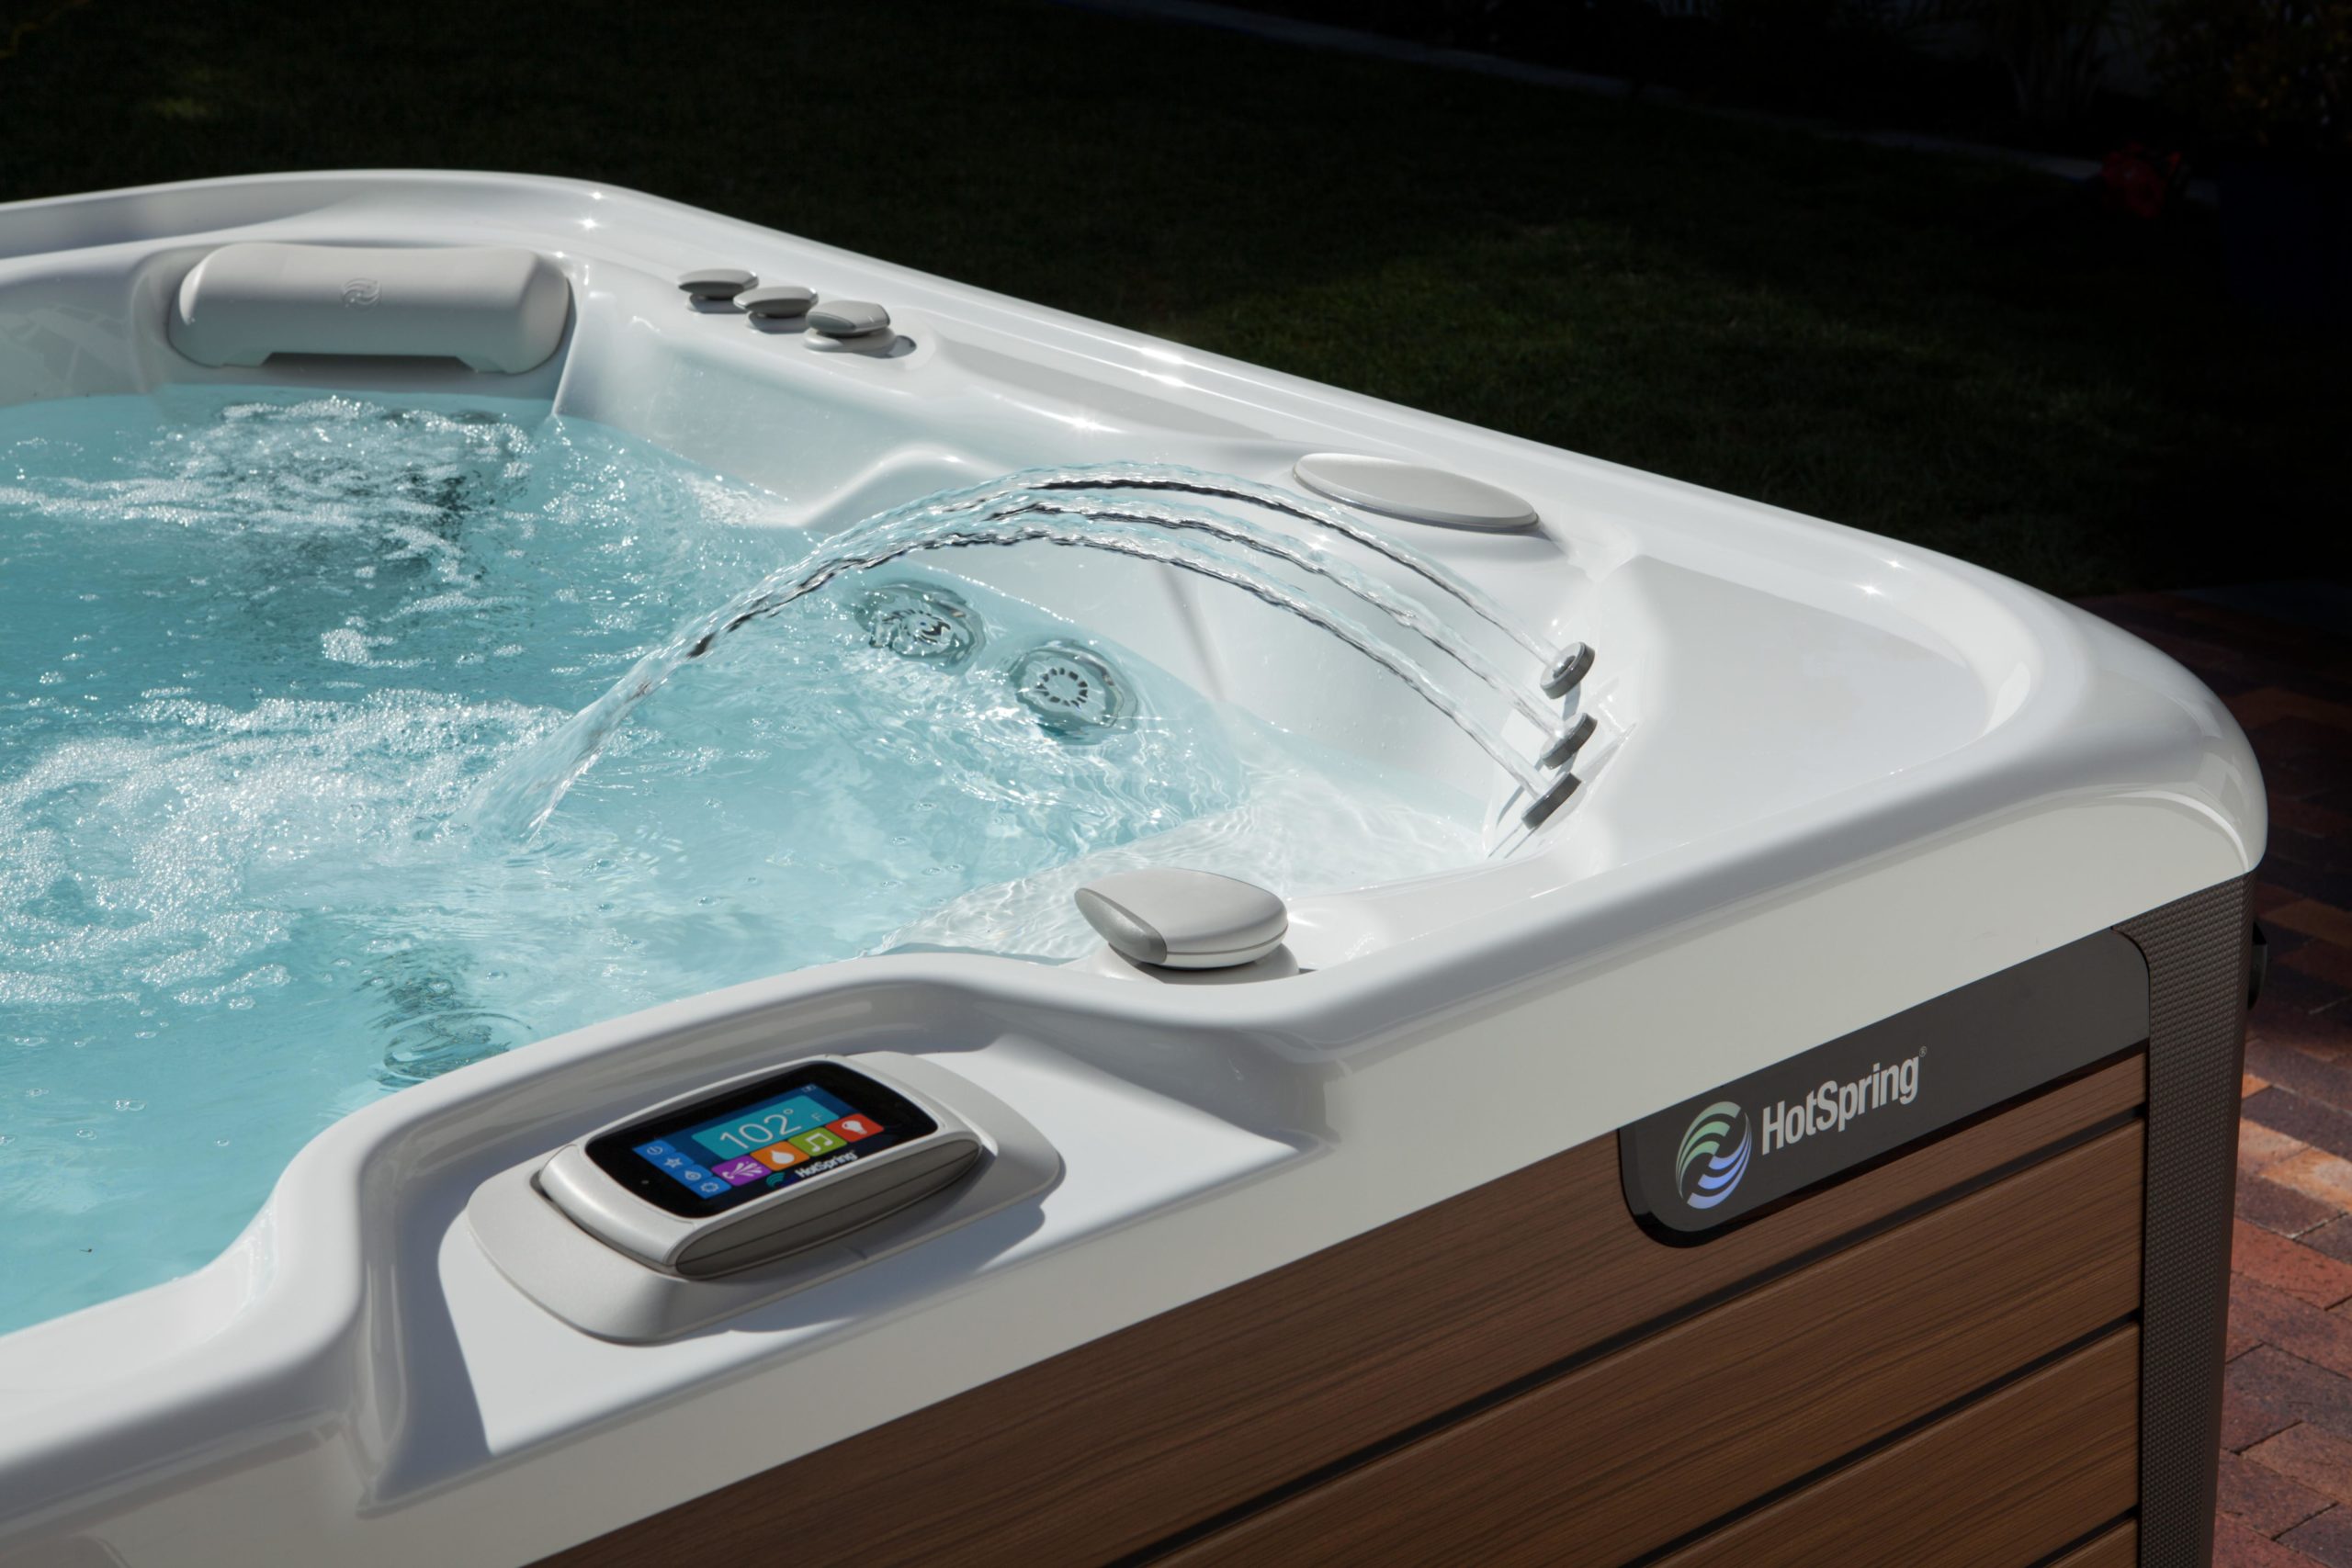 image of a highlife vanguard nxt hot tub with a waterfall feature